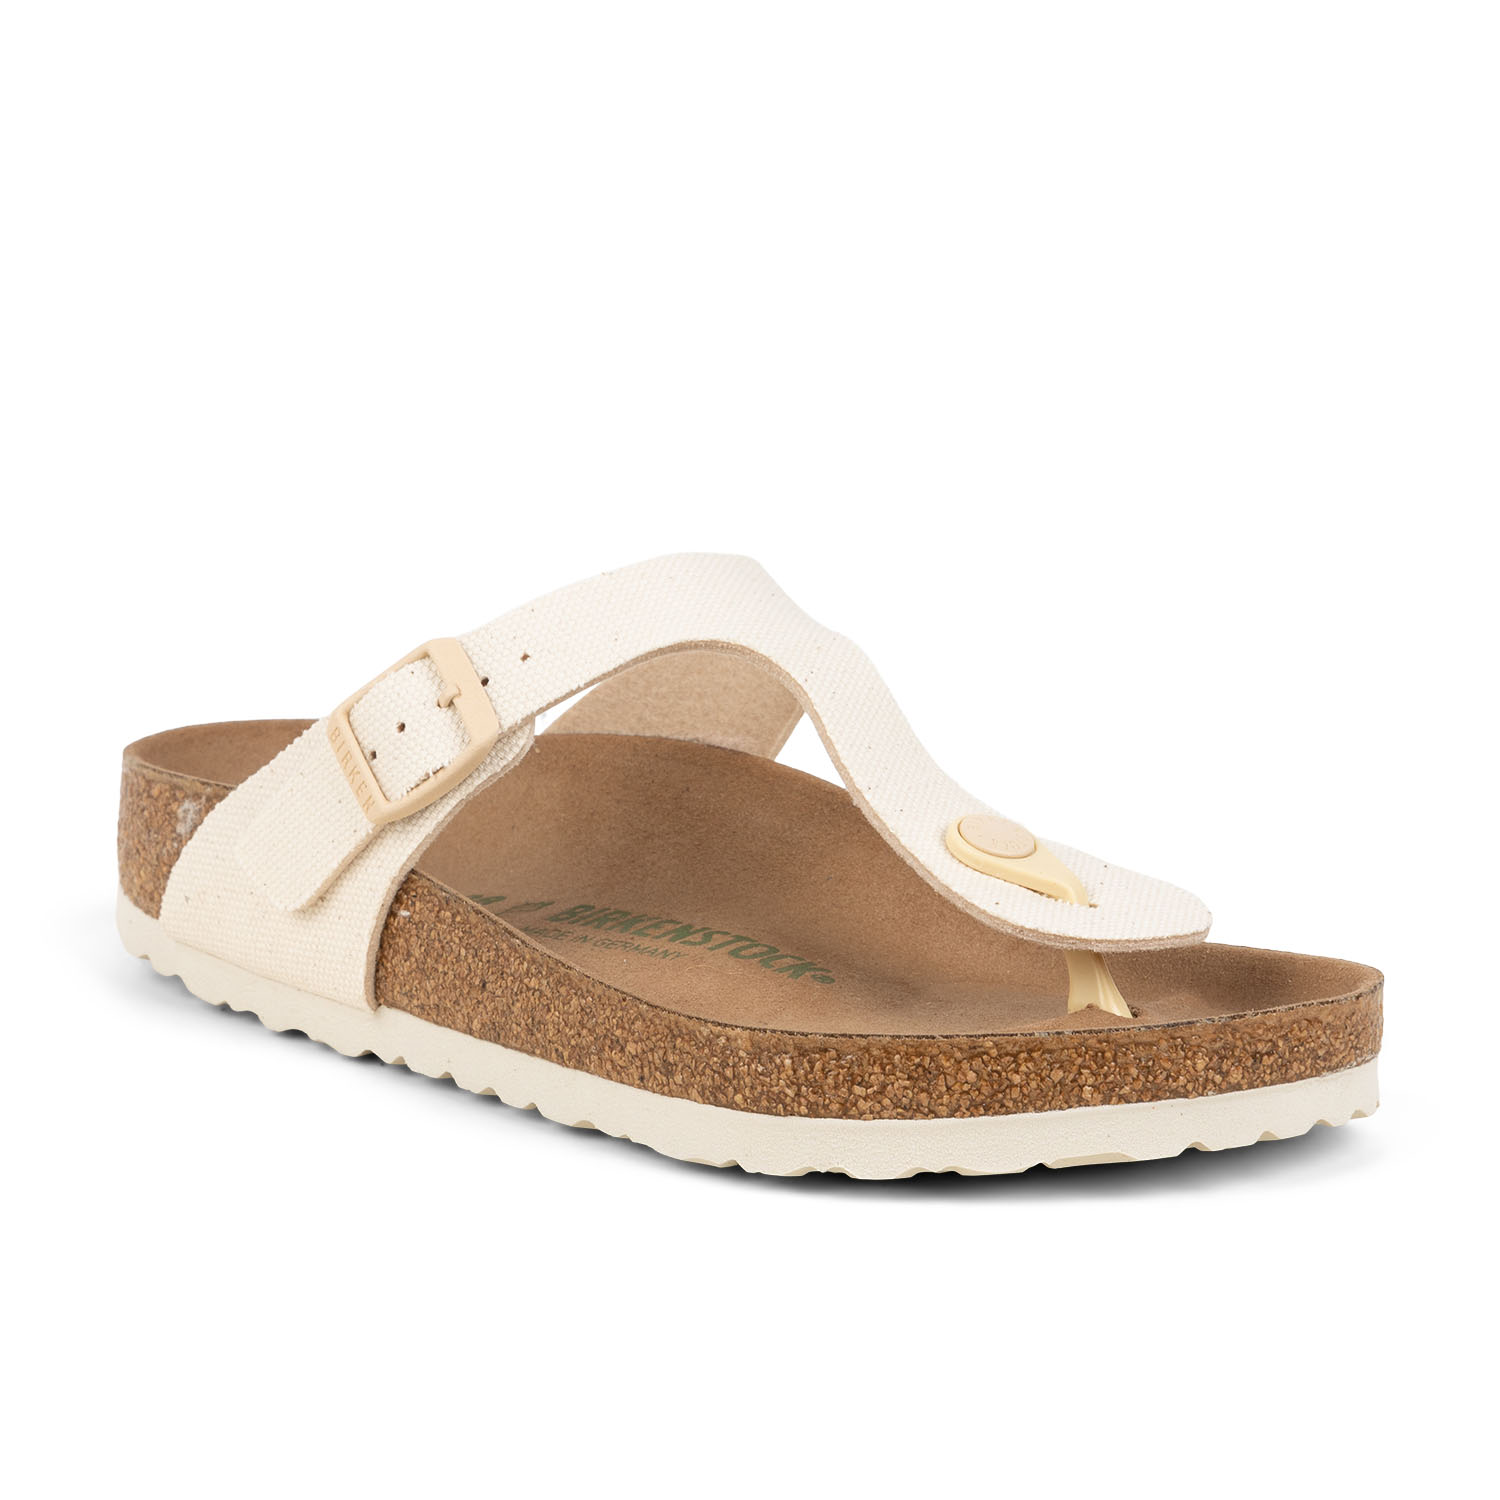 02 - GIZEH TEX - BIRKENSTOCK - Sandales - Cuir / synthétique